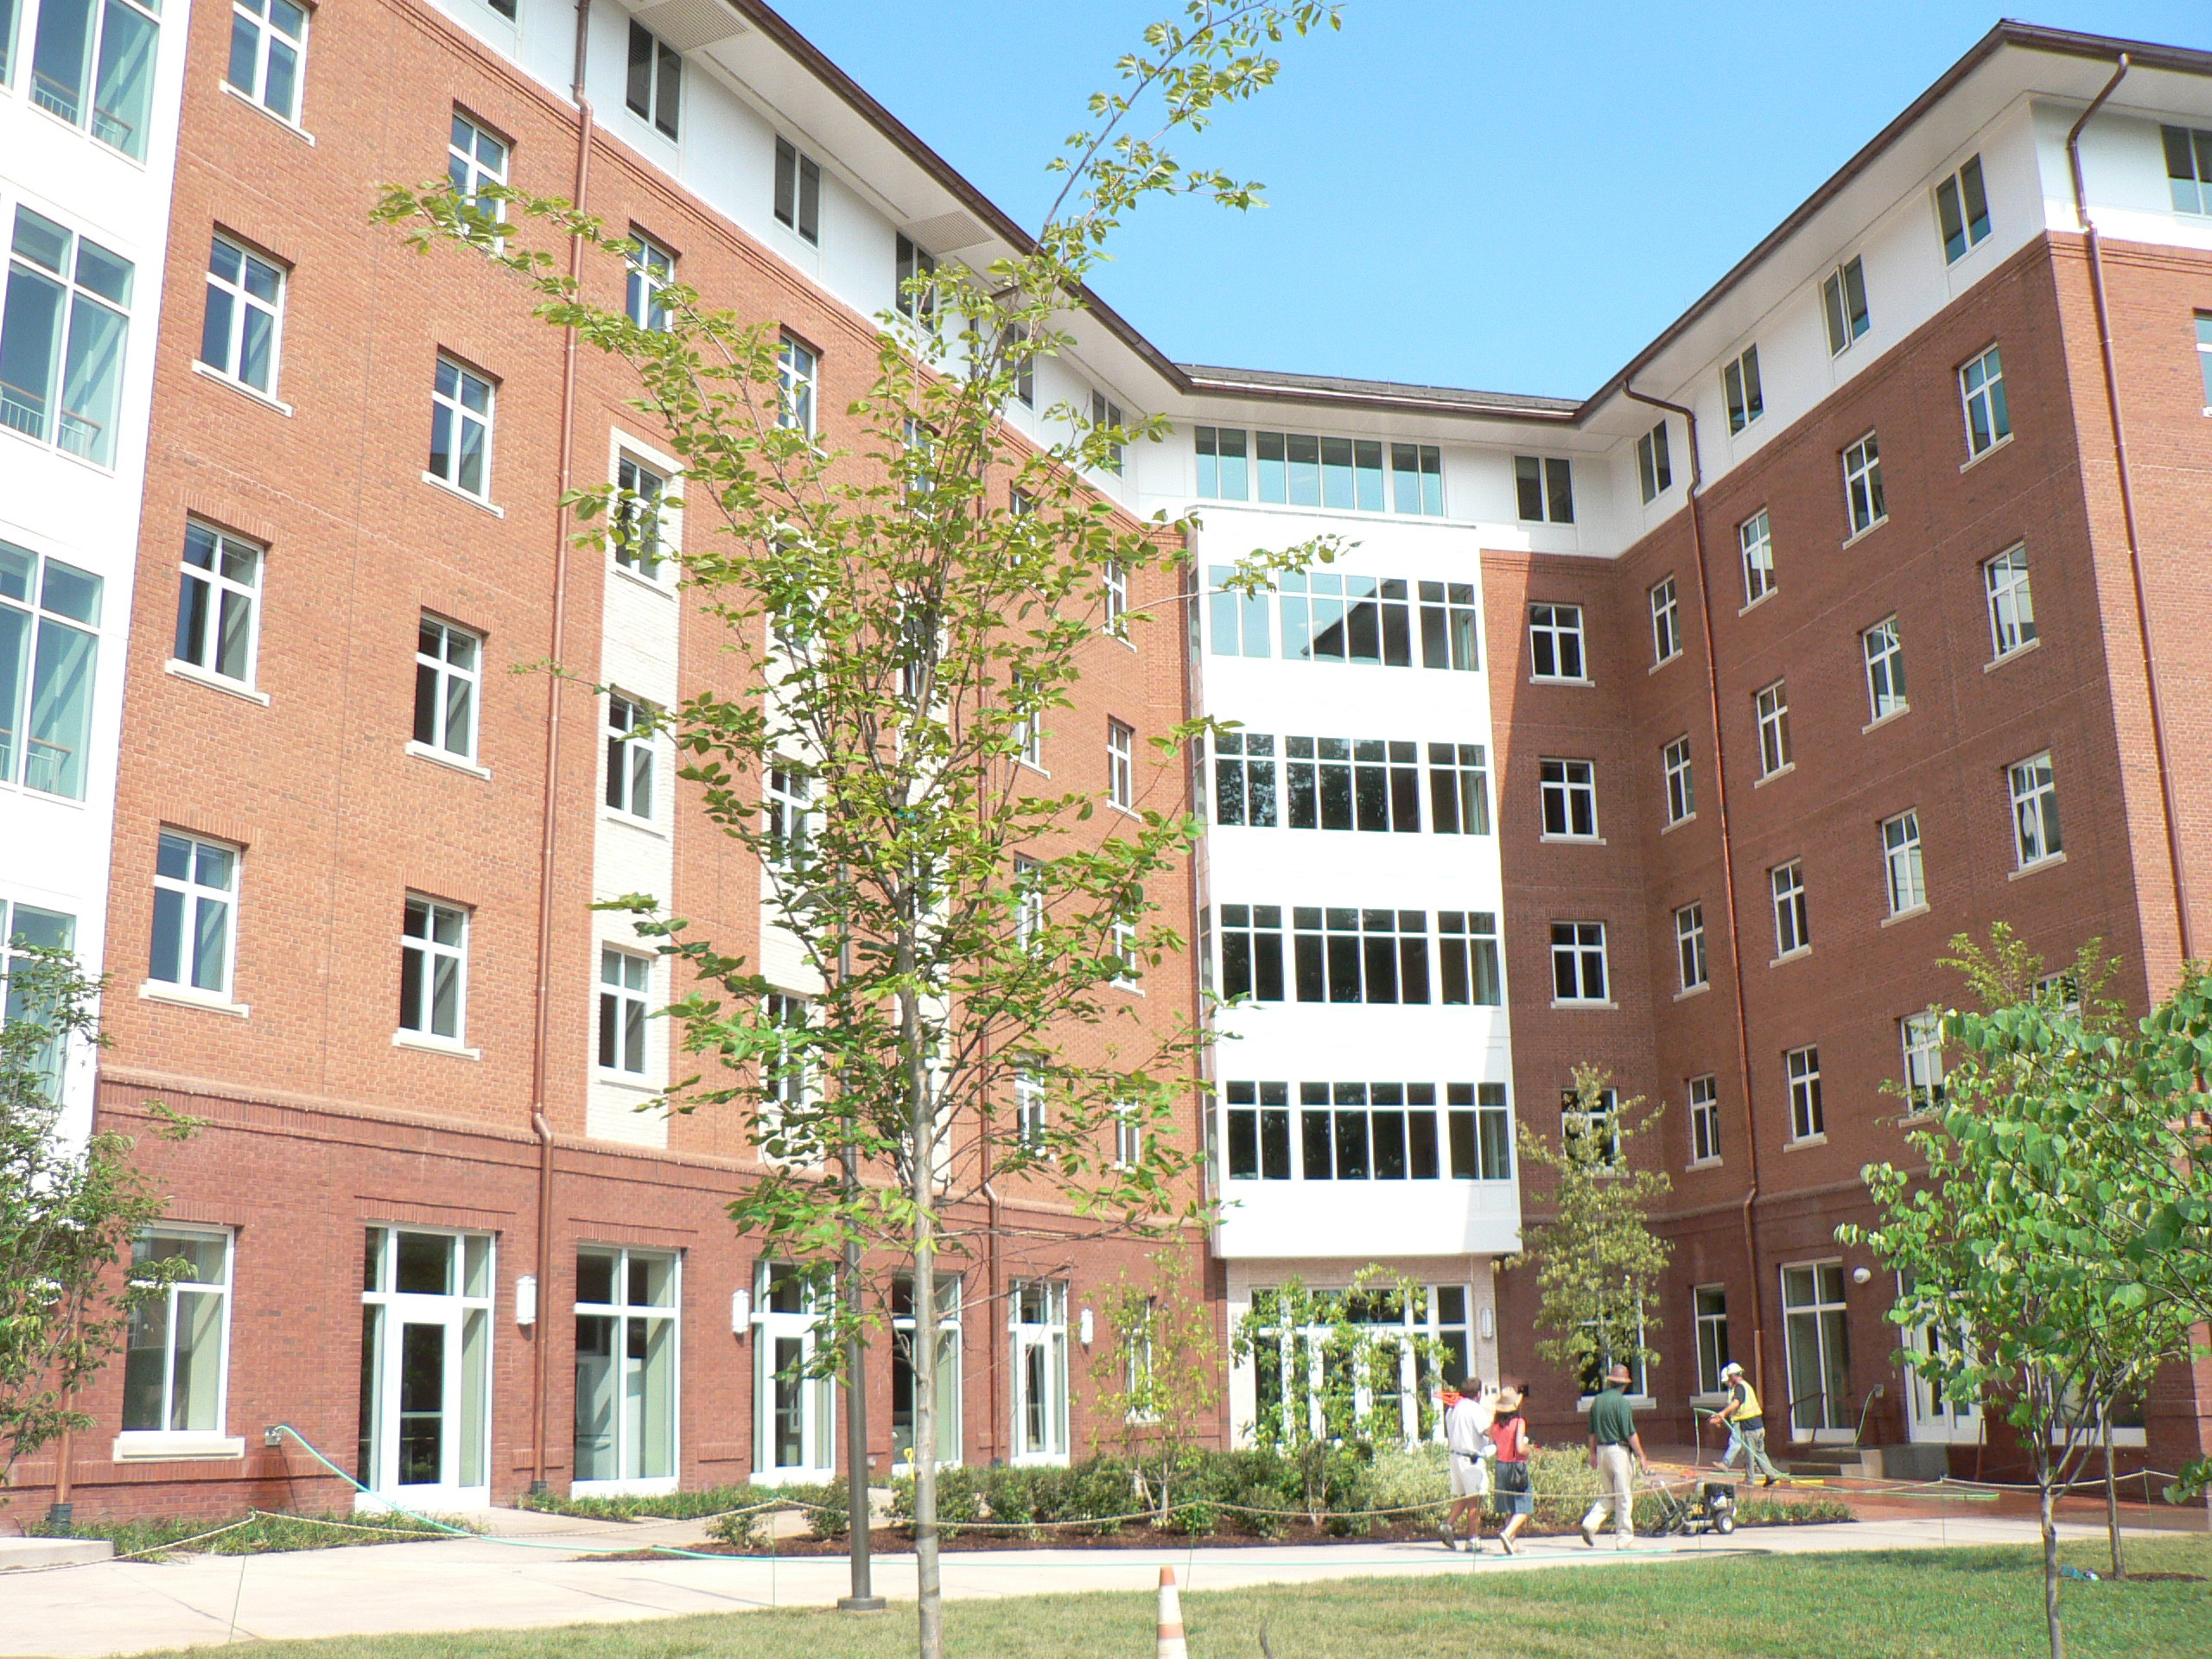 Digital rendering of the 6 story Residence hall